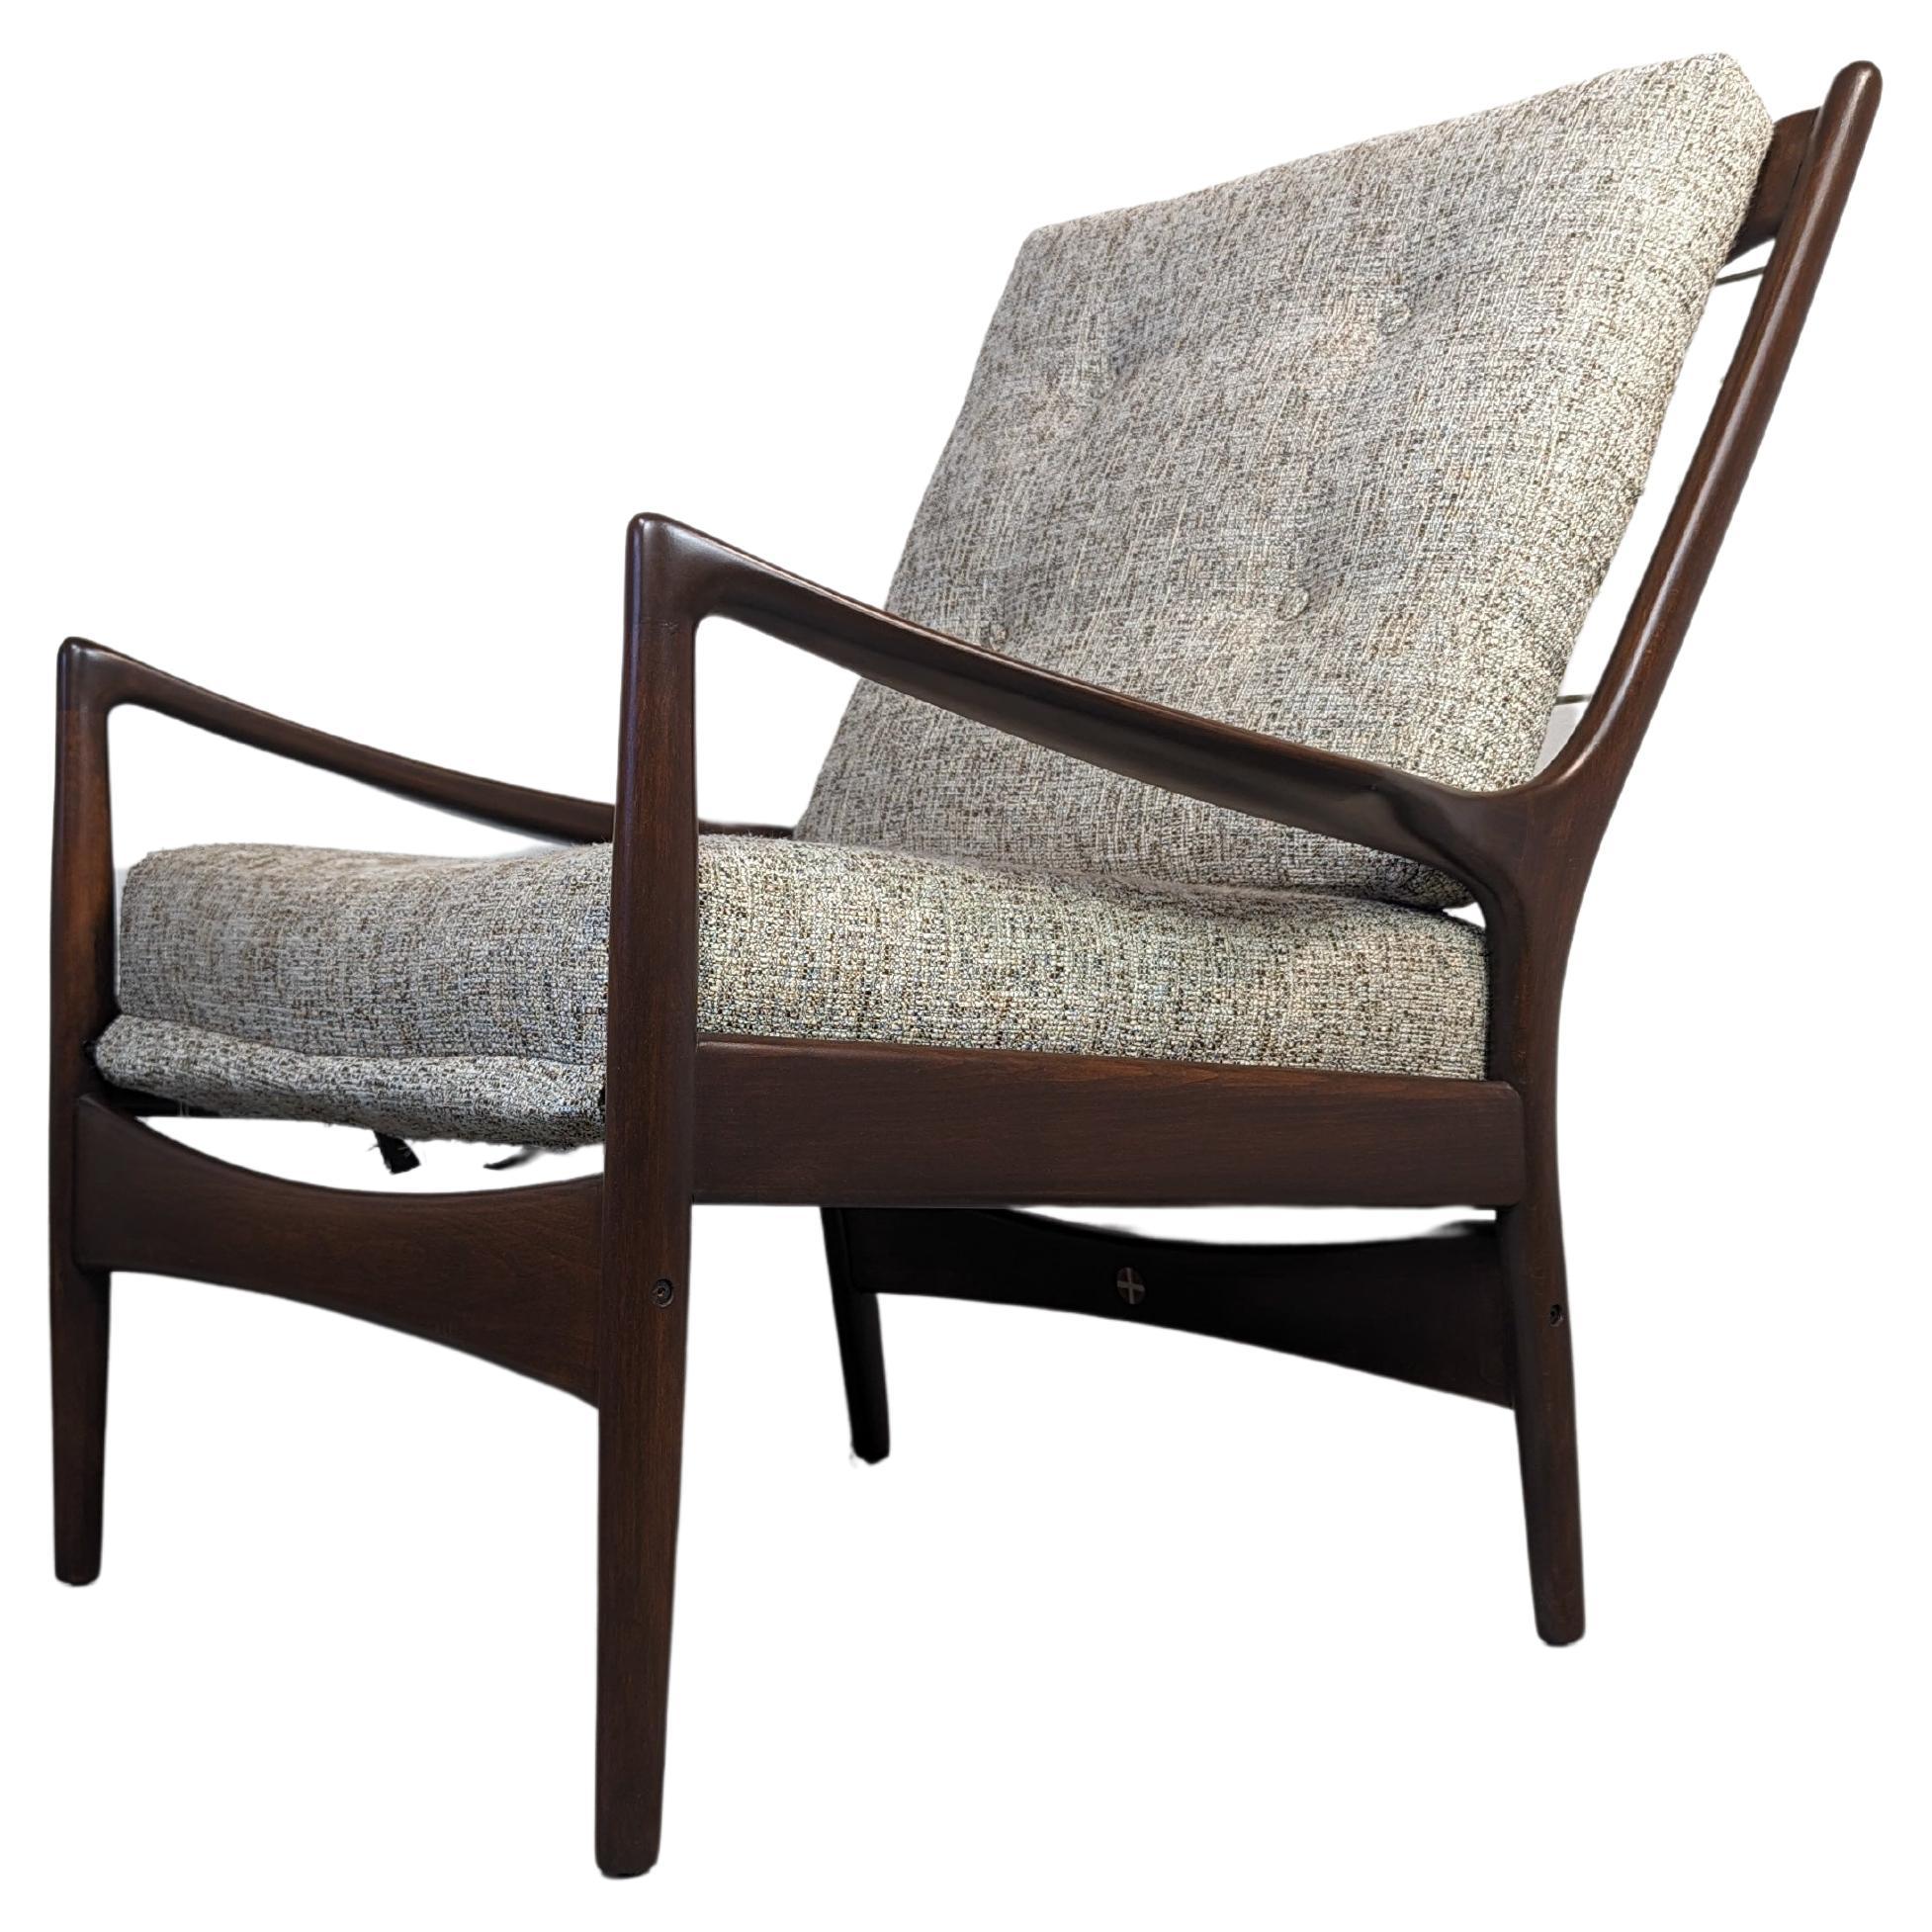 Danish Mid Century Modern Lounge Chair by Selig, c1960s